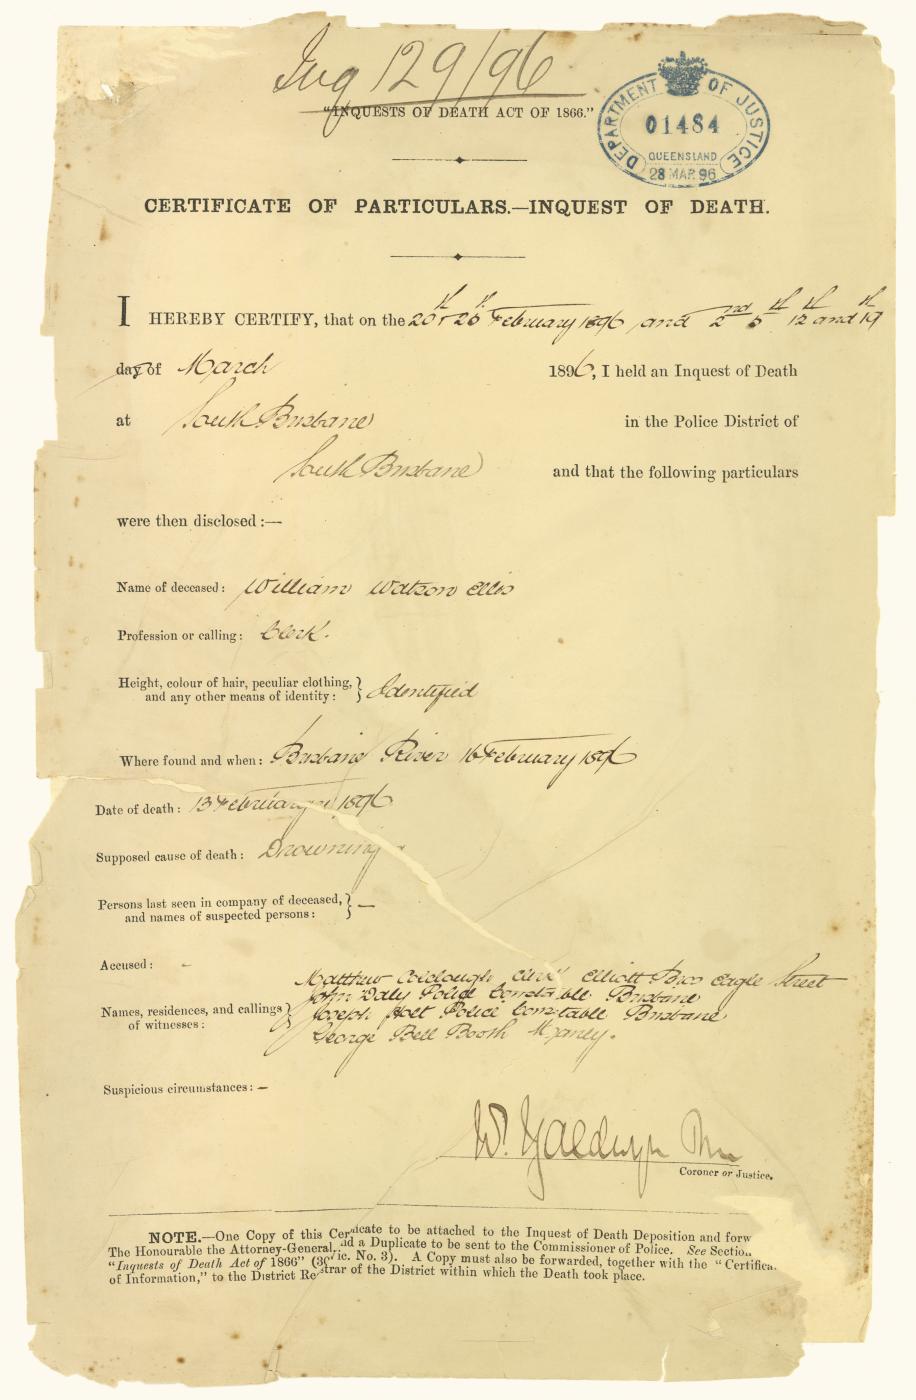 "Certificate of Particulars – Inquest of death" form for William Watson Ellis who died on 13 February 1896 by drowning